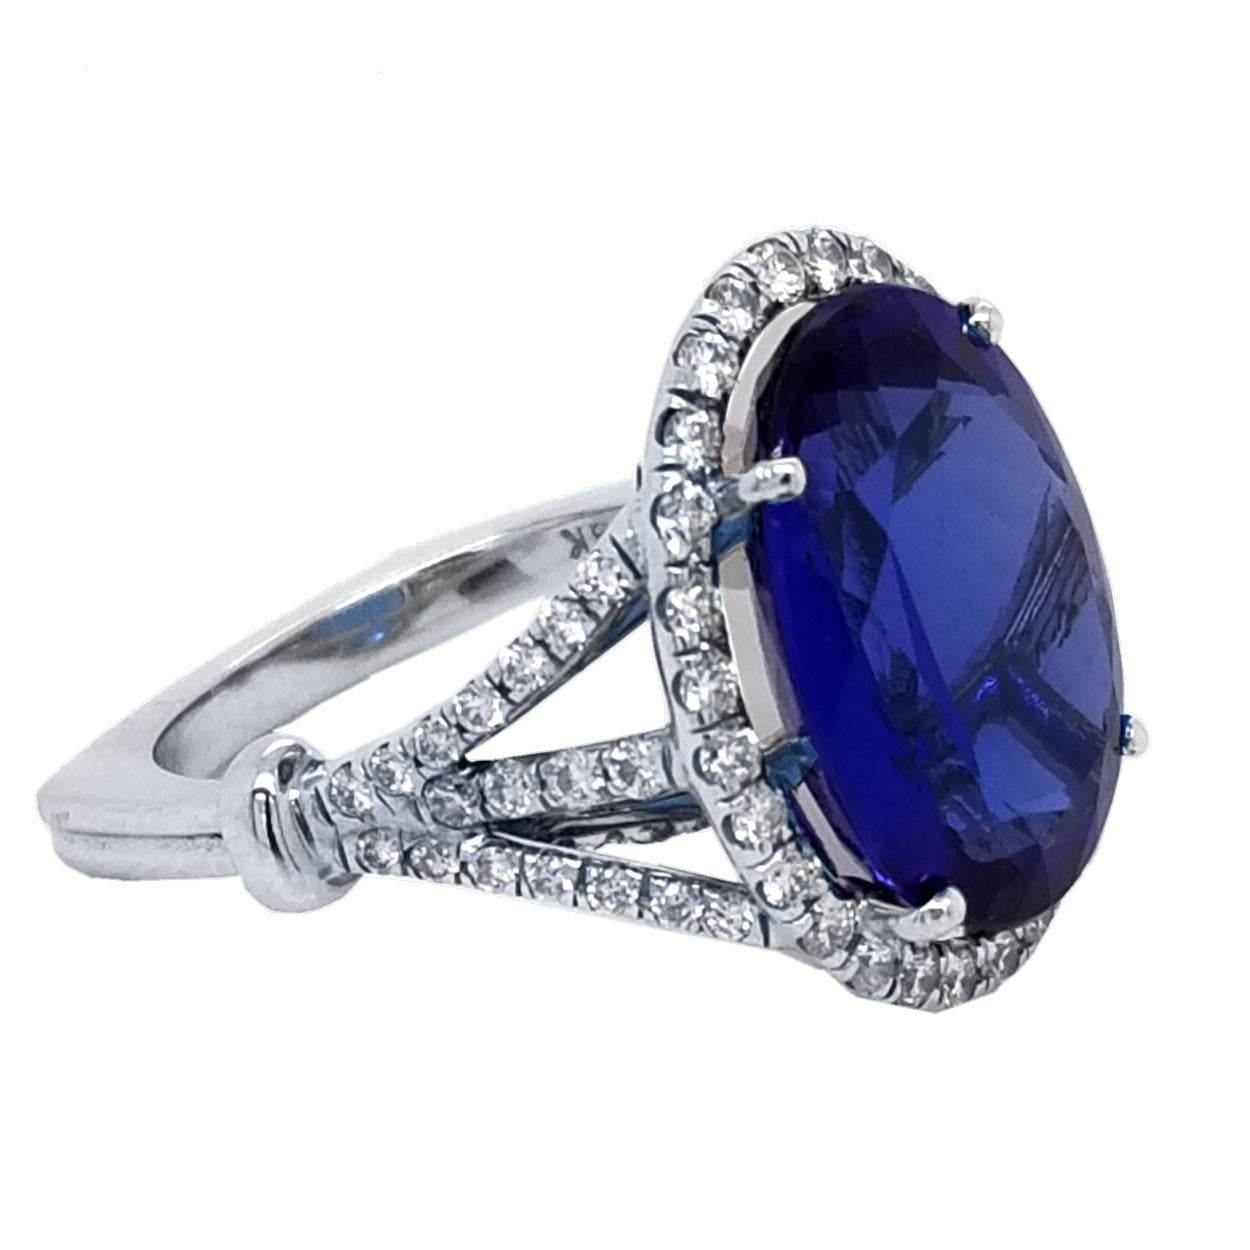 A beautiful color 9.38 Ct oval tanzanite set in the center of an 18K split shank pave set diamond engagement ring with a halo to create great contrast. 

Details:
Center Stone: 9.39 carat Oval tanzanite
Side Stone Diamonds: 0.91 total carat weight,